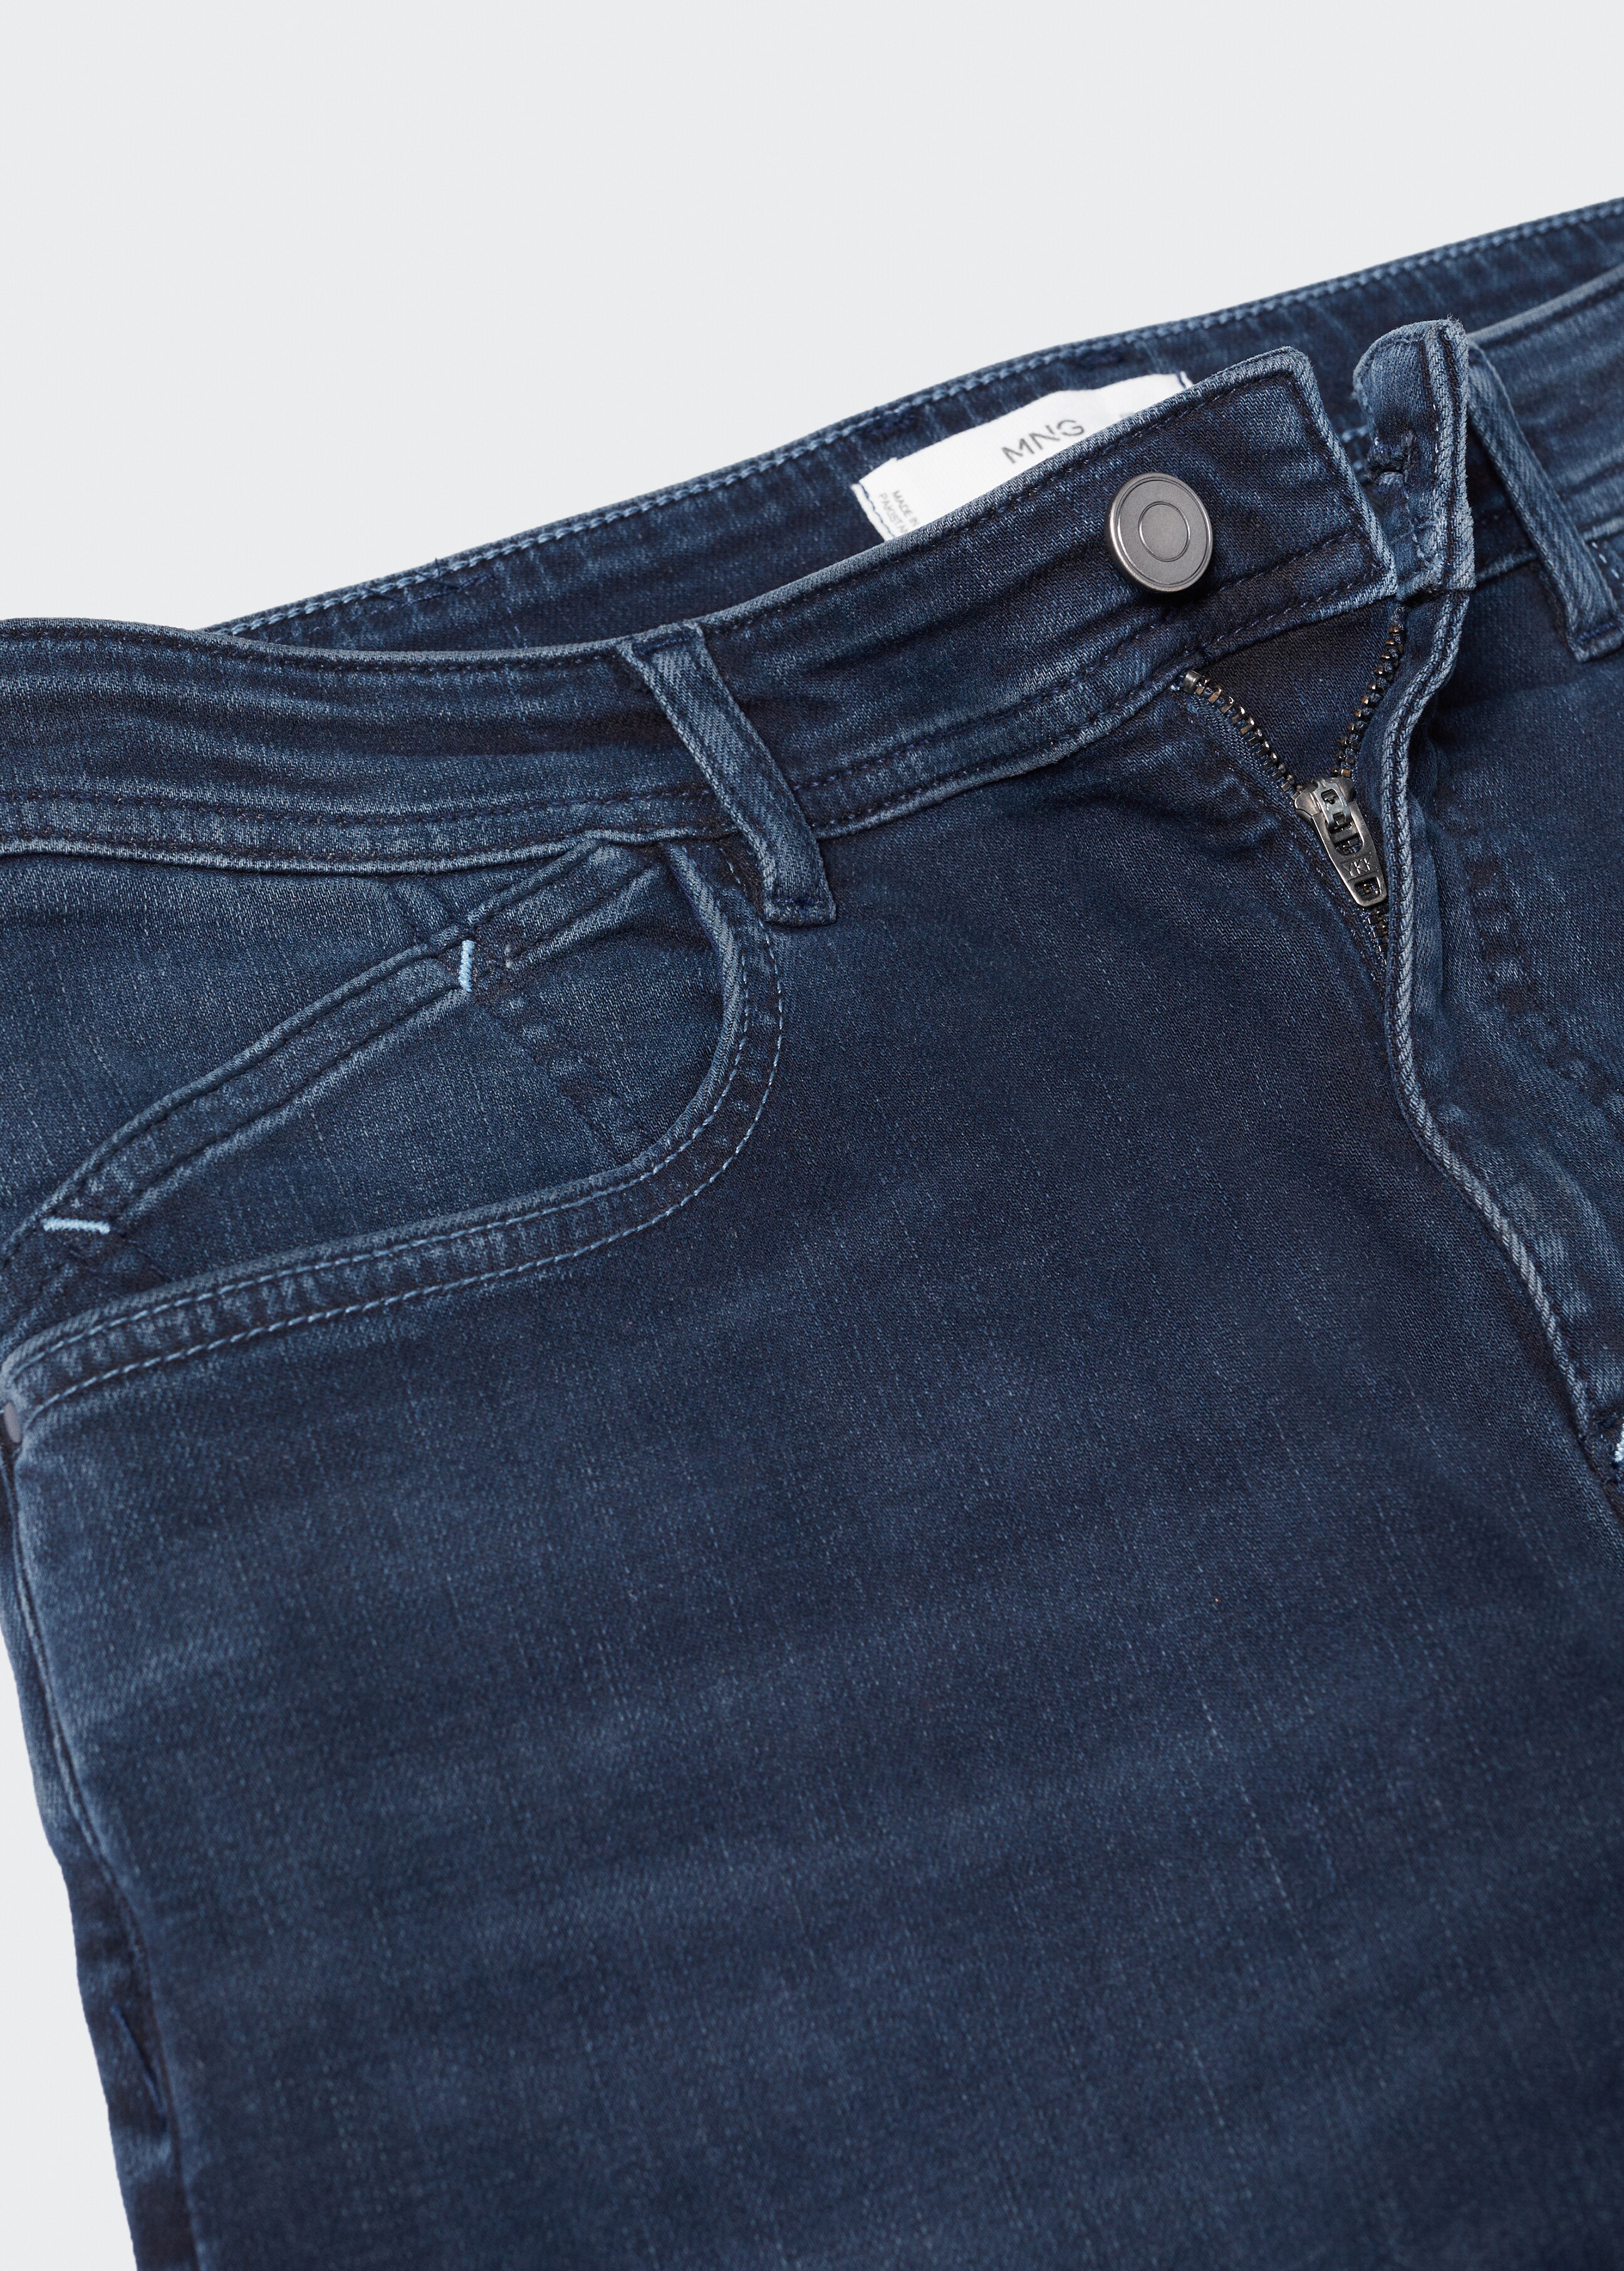 Premium skinny jeans - Details of the article 8